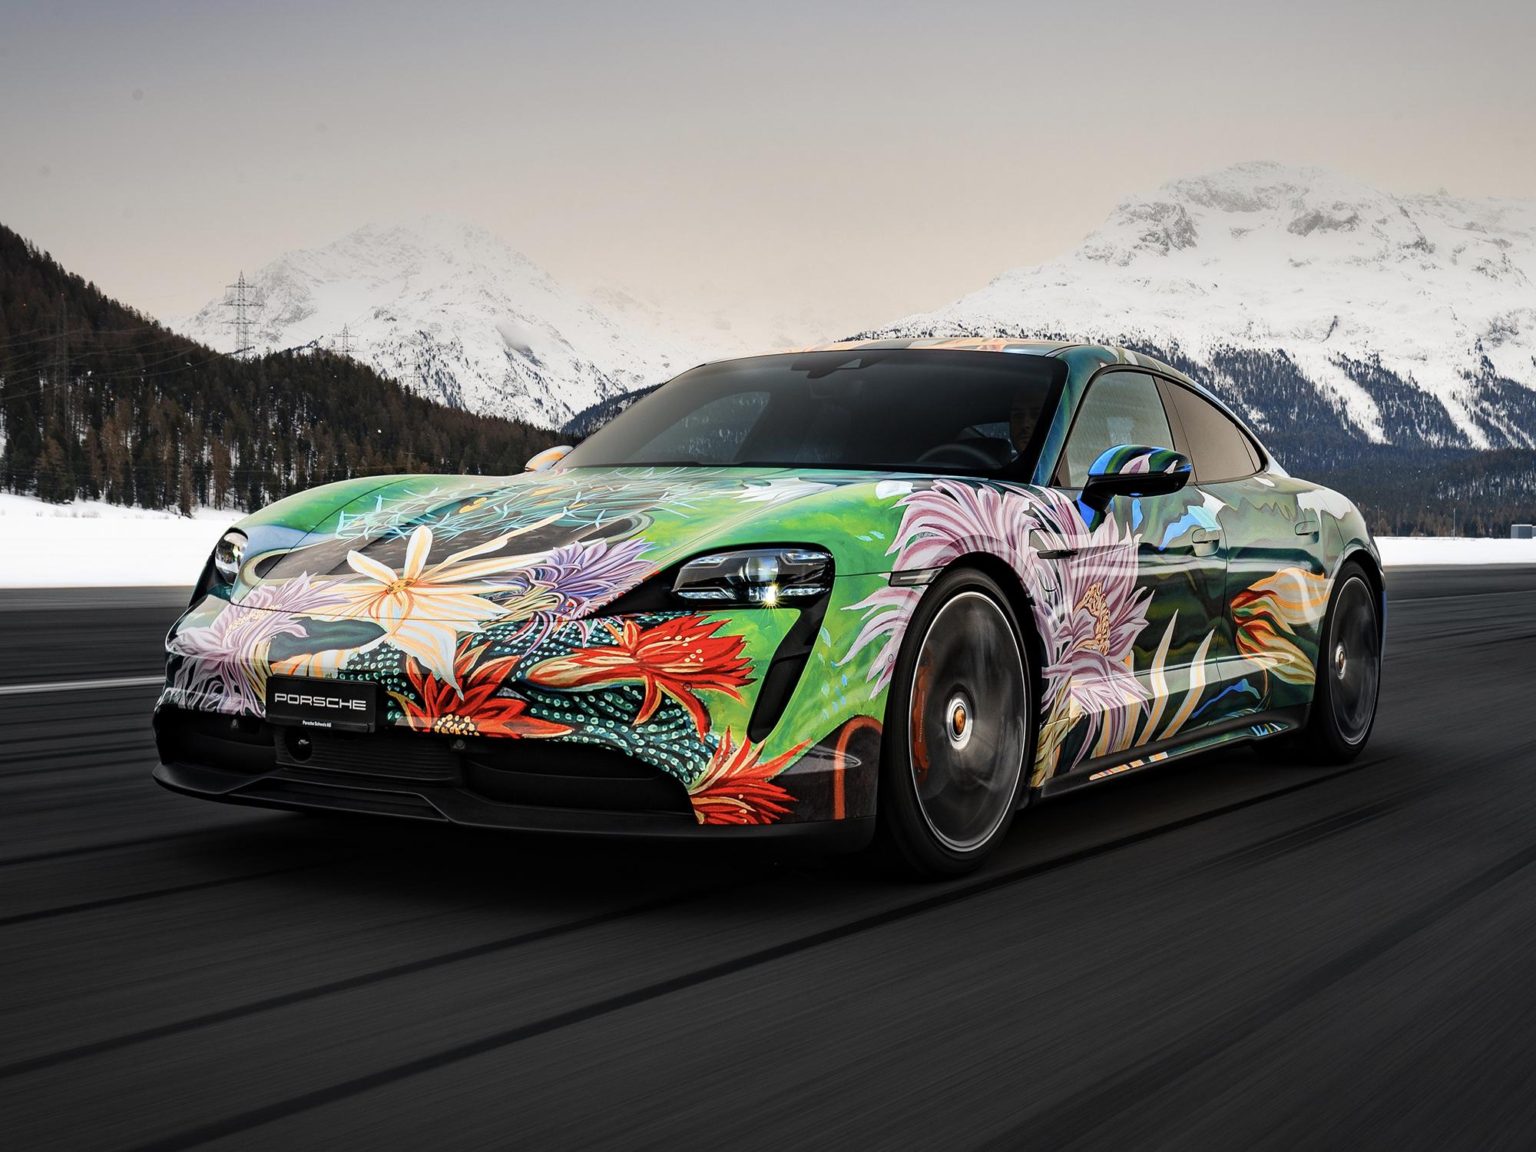 This unique art car will be auctioned off in April.